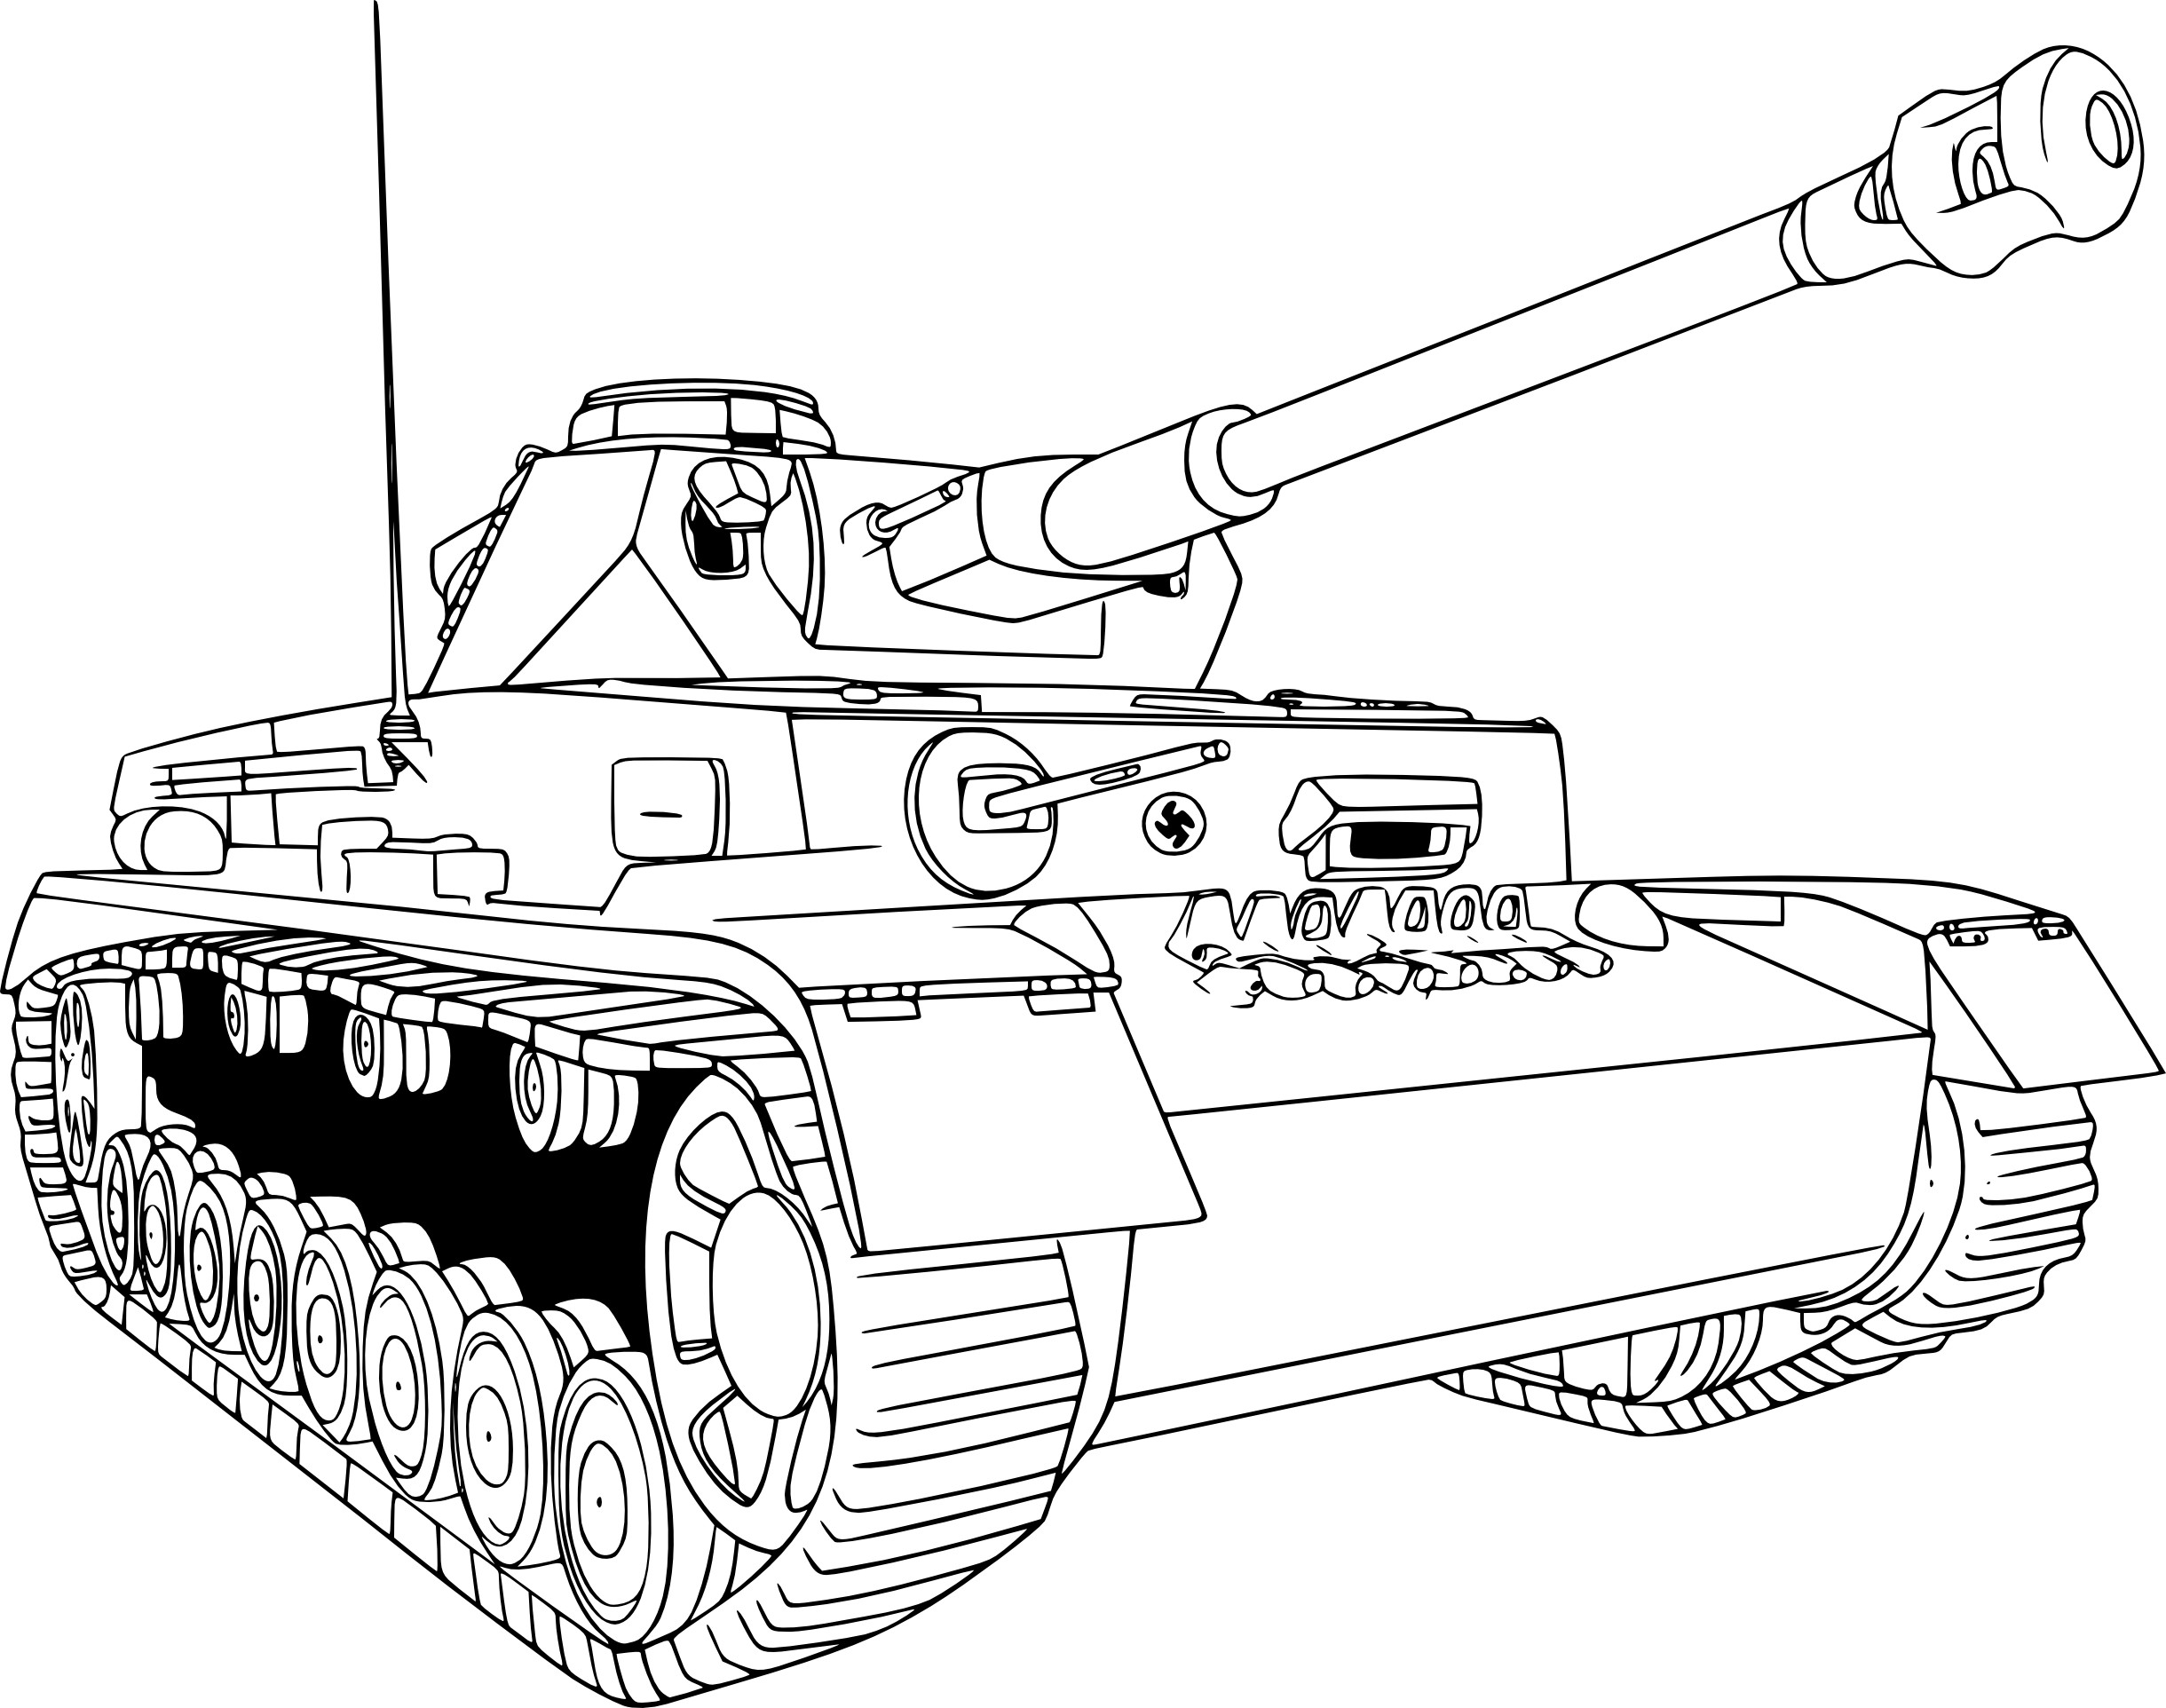 War Chariot coloring page